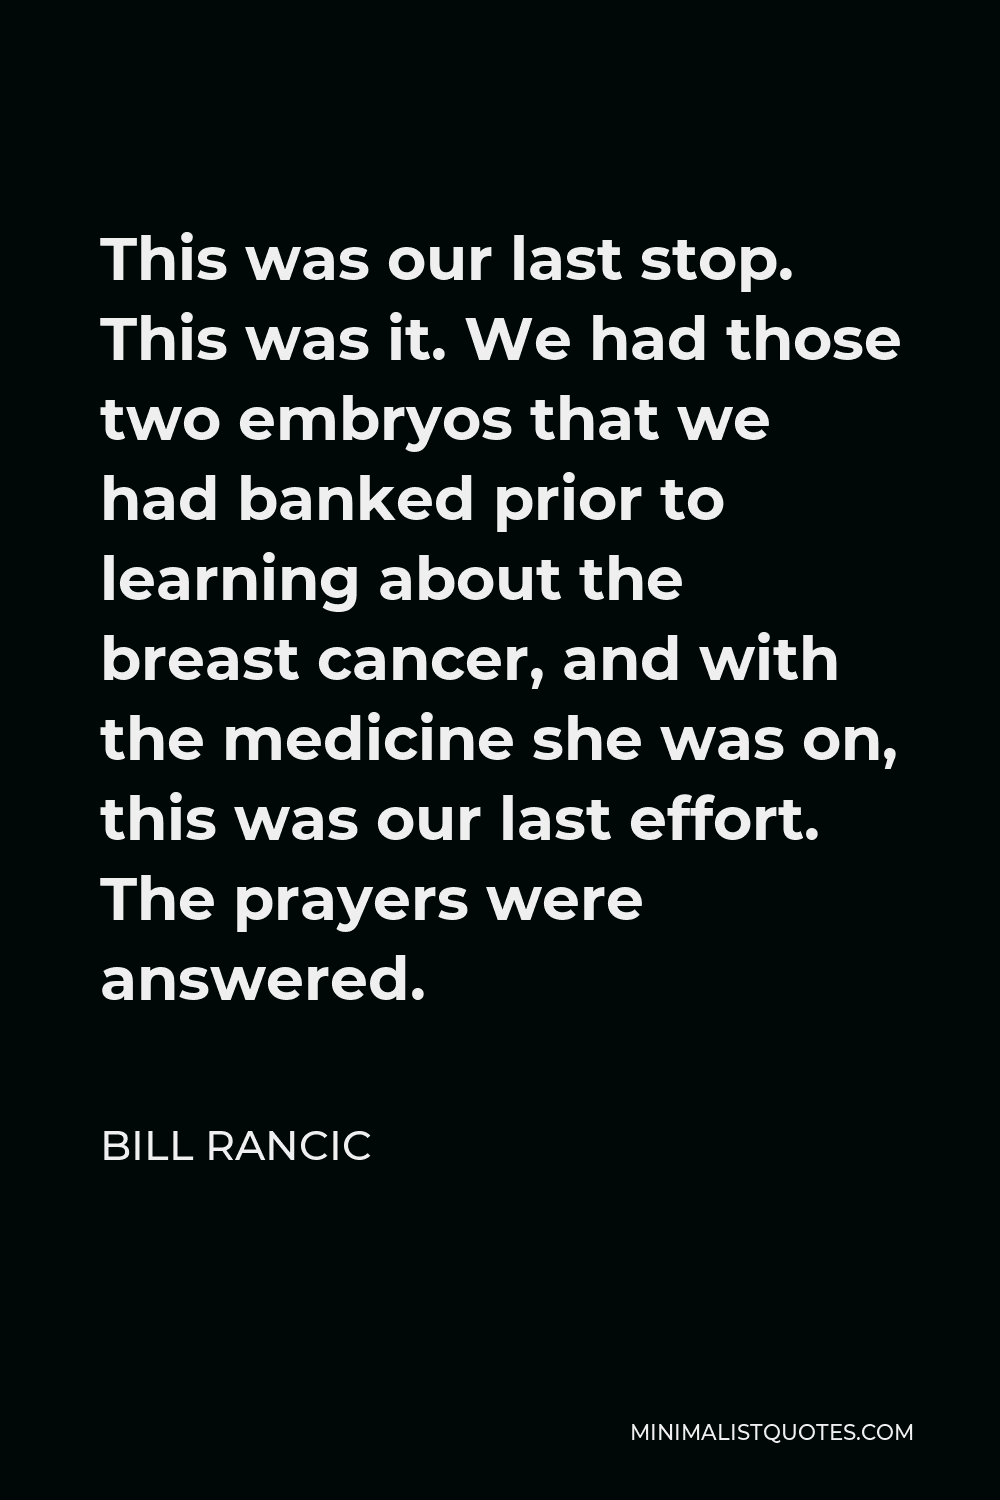 Bill Rancic Quote - This was our last stop. This was it. We had those two embryos that we had banked prior to learning about the breast cancer, and with the medicine she was on, this was our last effort. The prayers were answered.